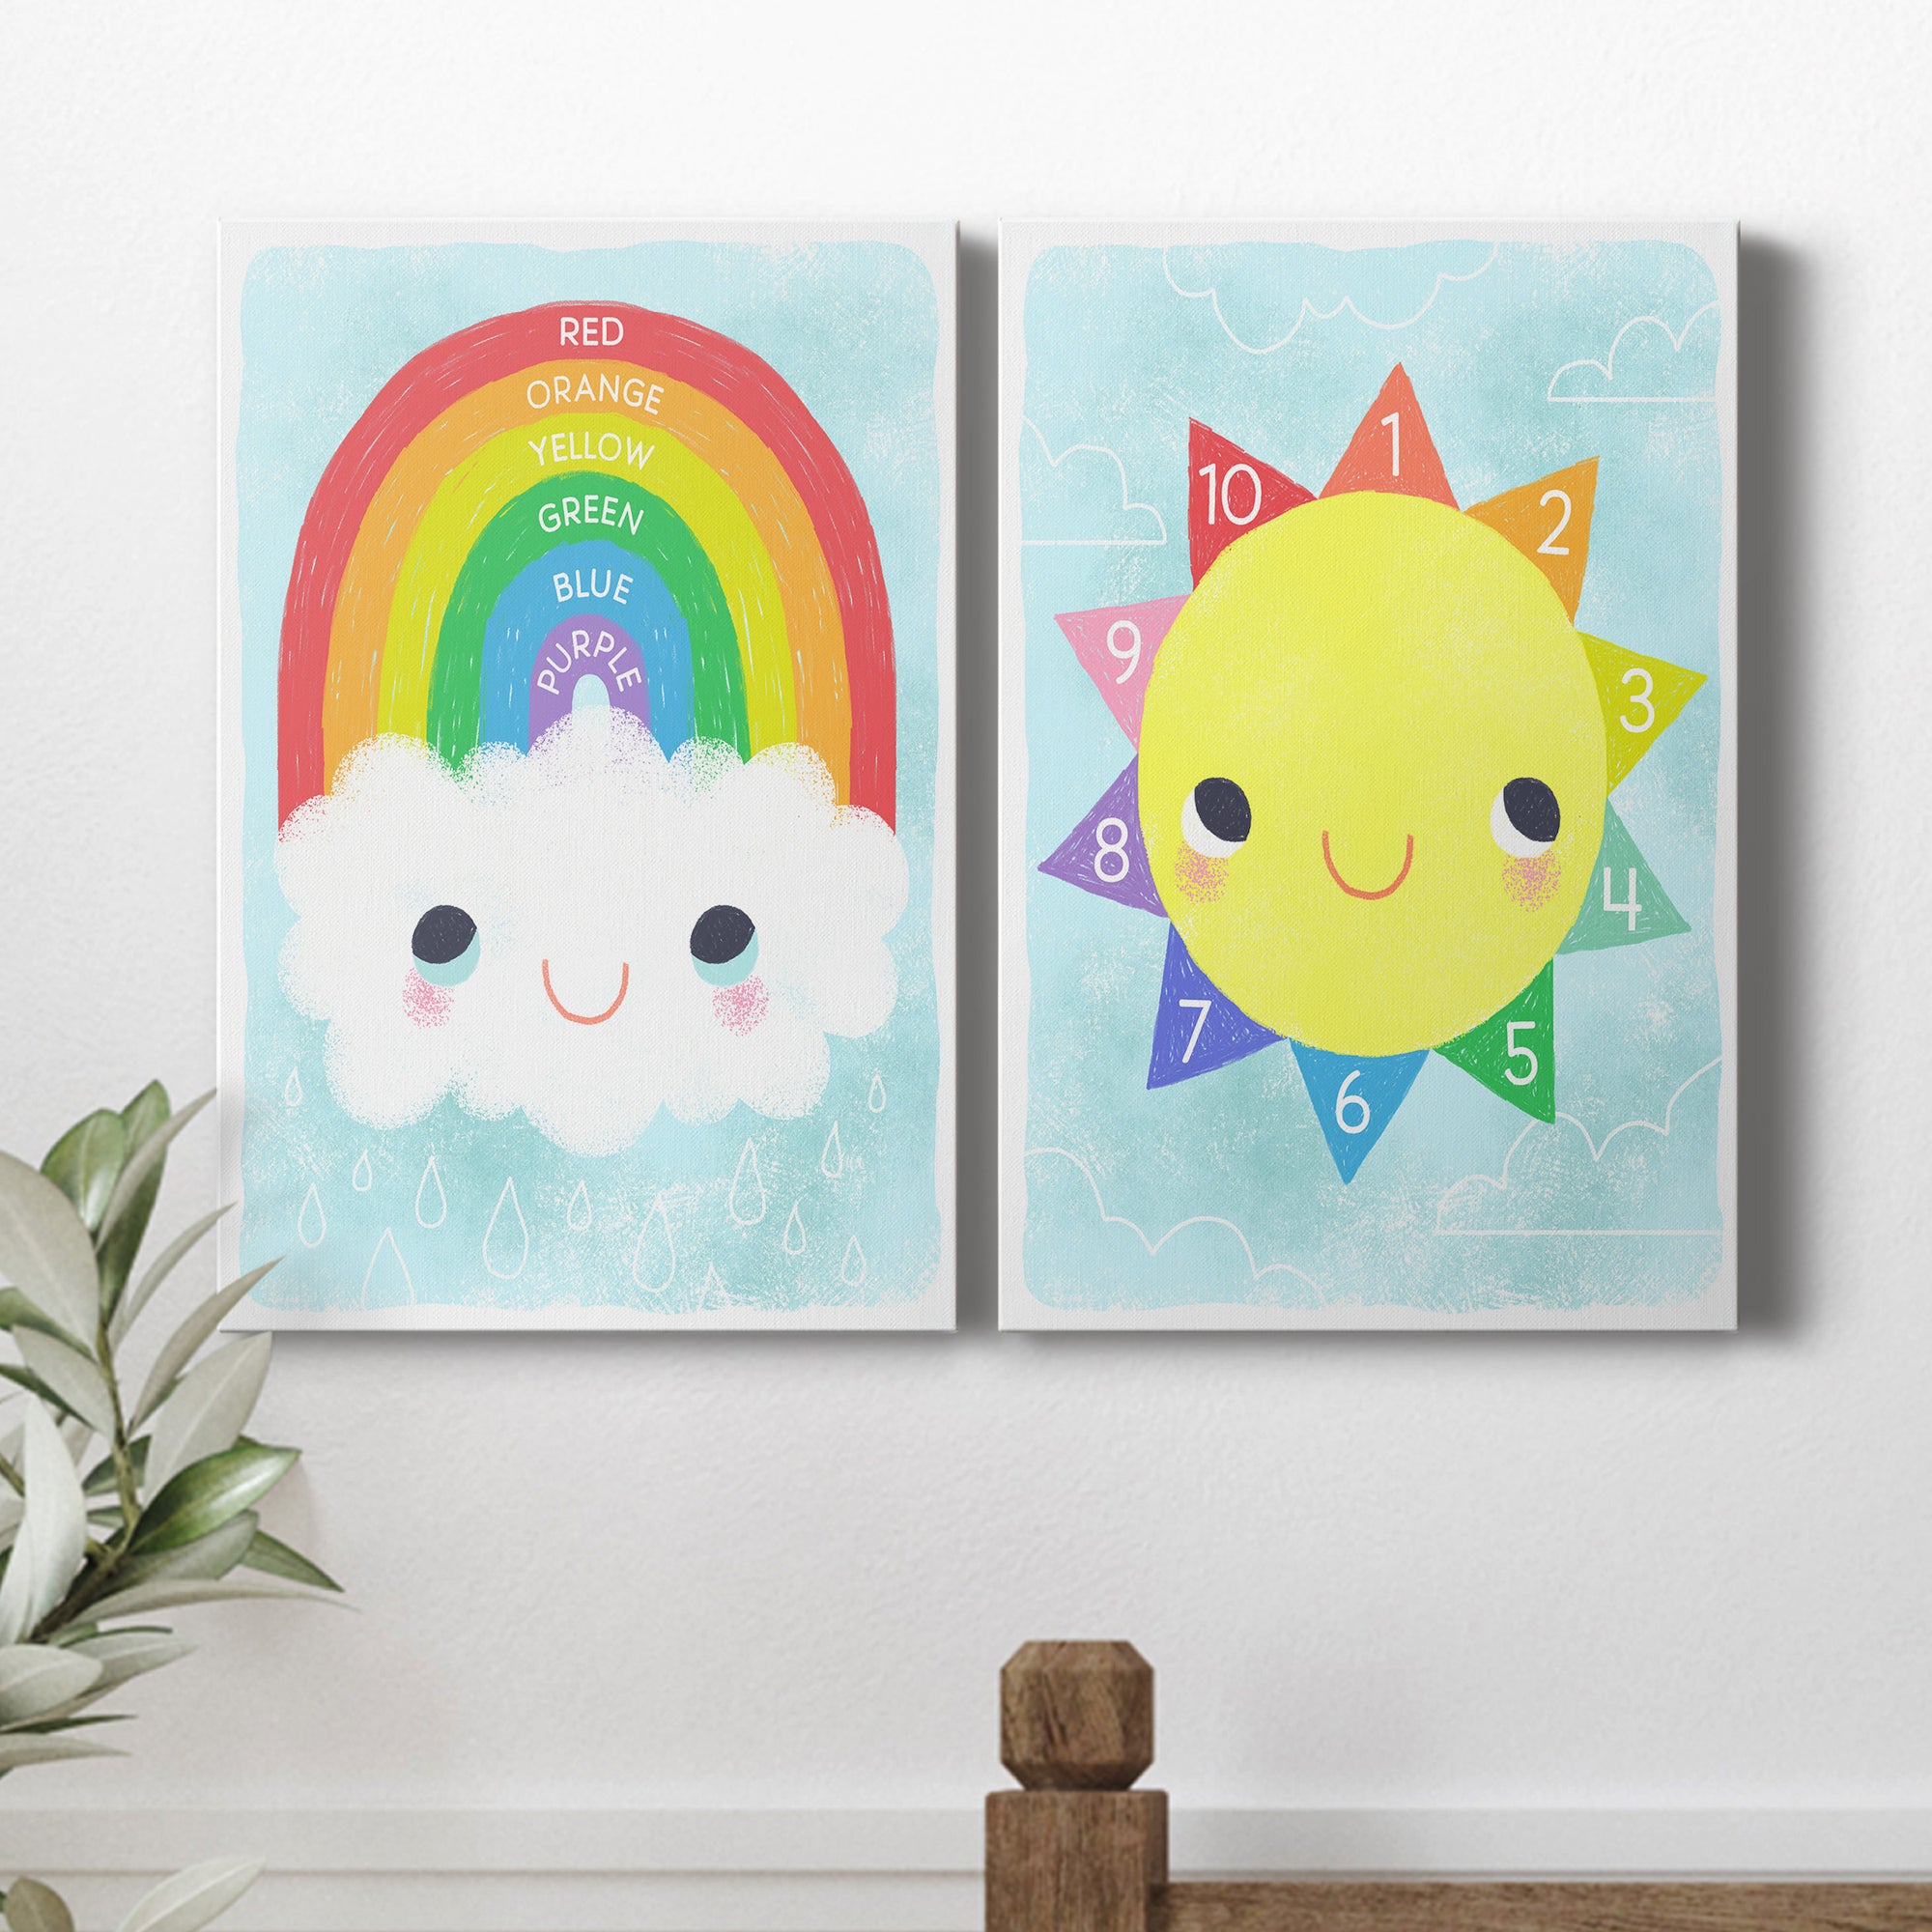 Rainbow Colors Premium Gallery Wrapped Canvas - Ready to Hang - Set of 2 - 8 x 12 Each